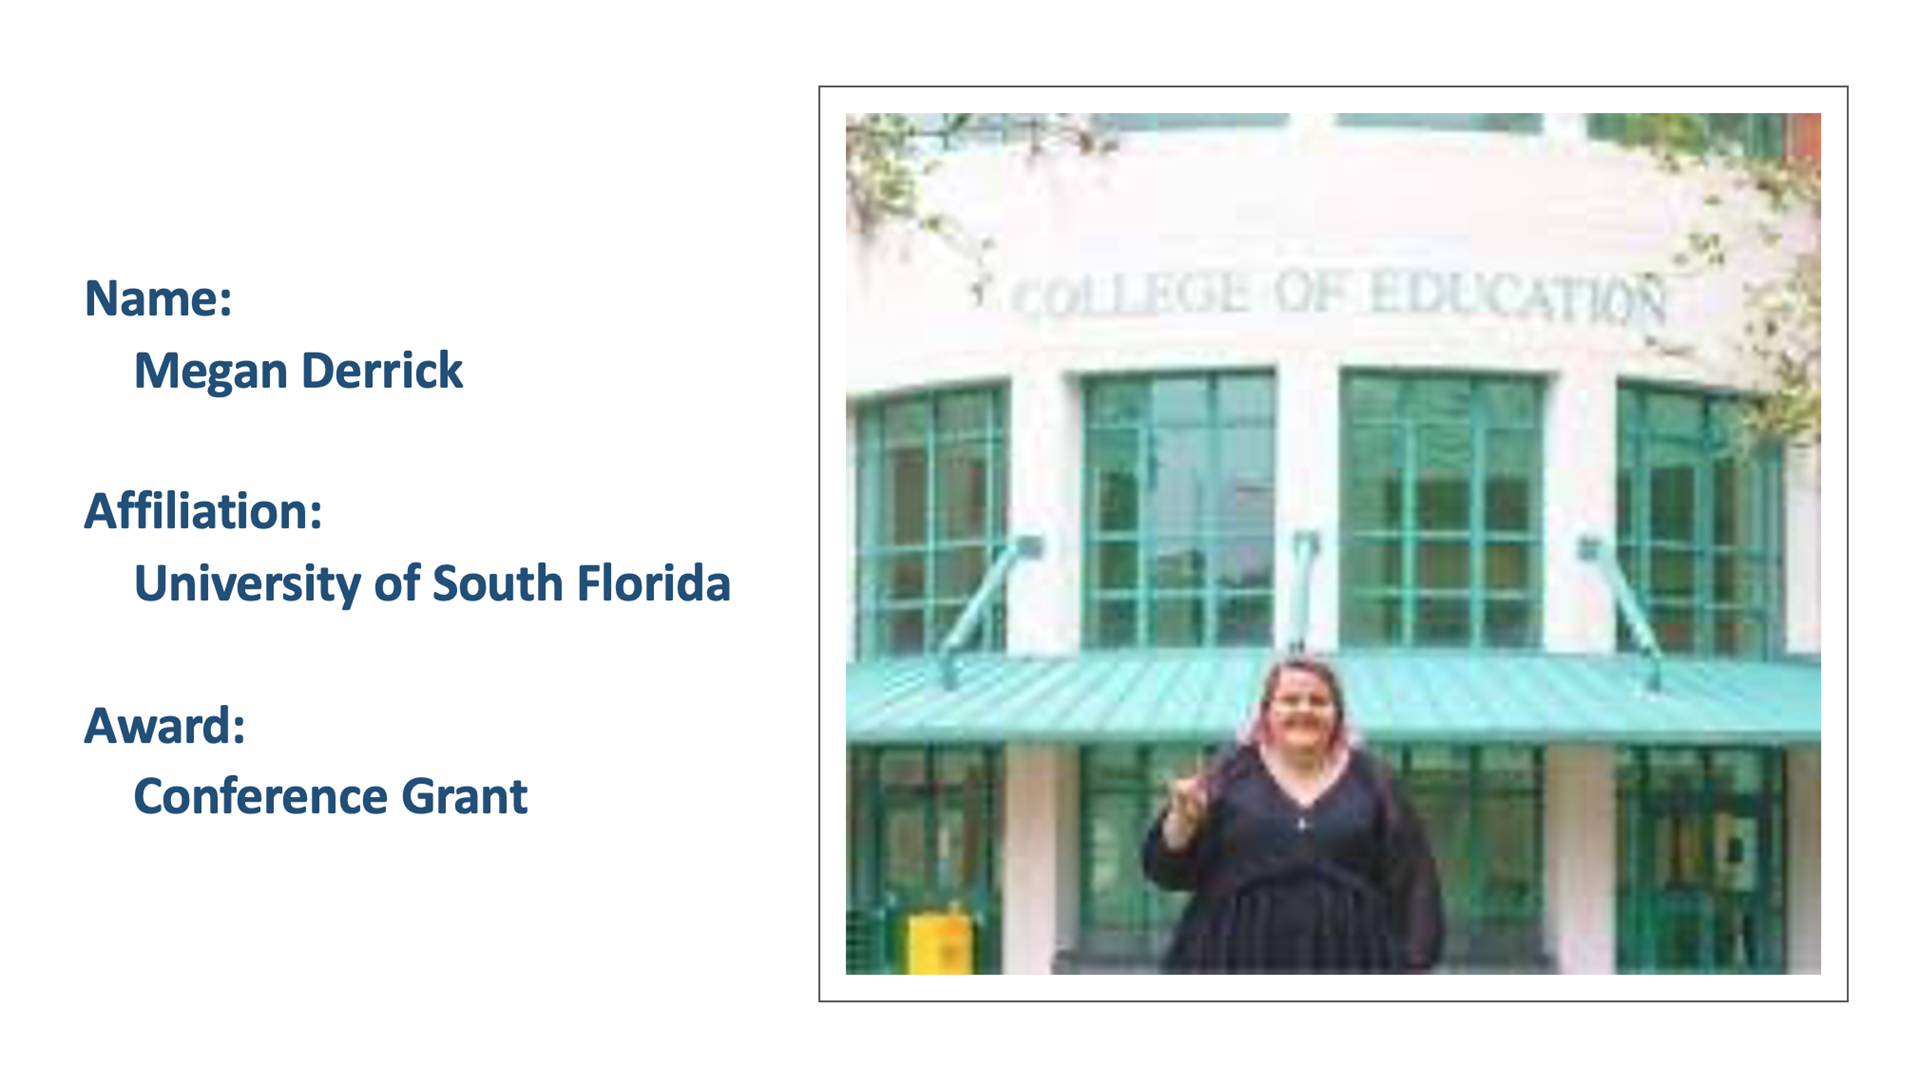 Megan Derrick of the University of South Florida. Awarded a Conference Grant.